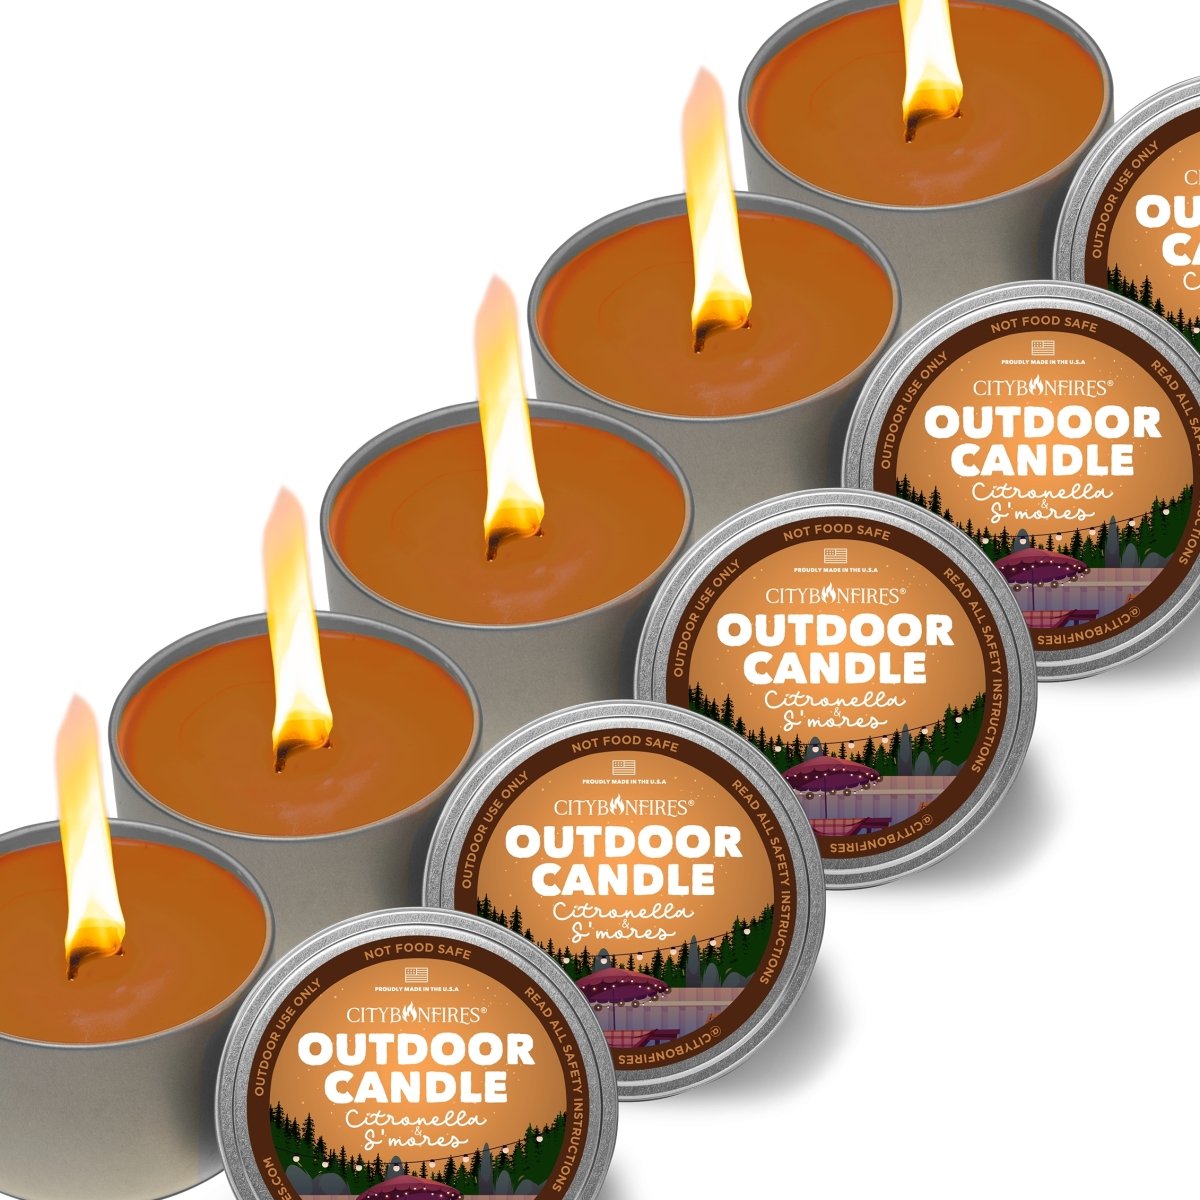 The Outdoor Citronella Candle - S'mores Scent - City Bonfires